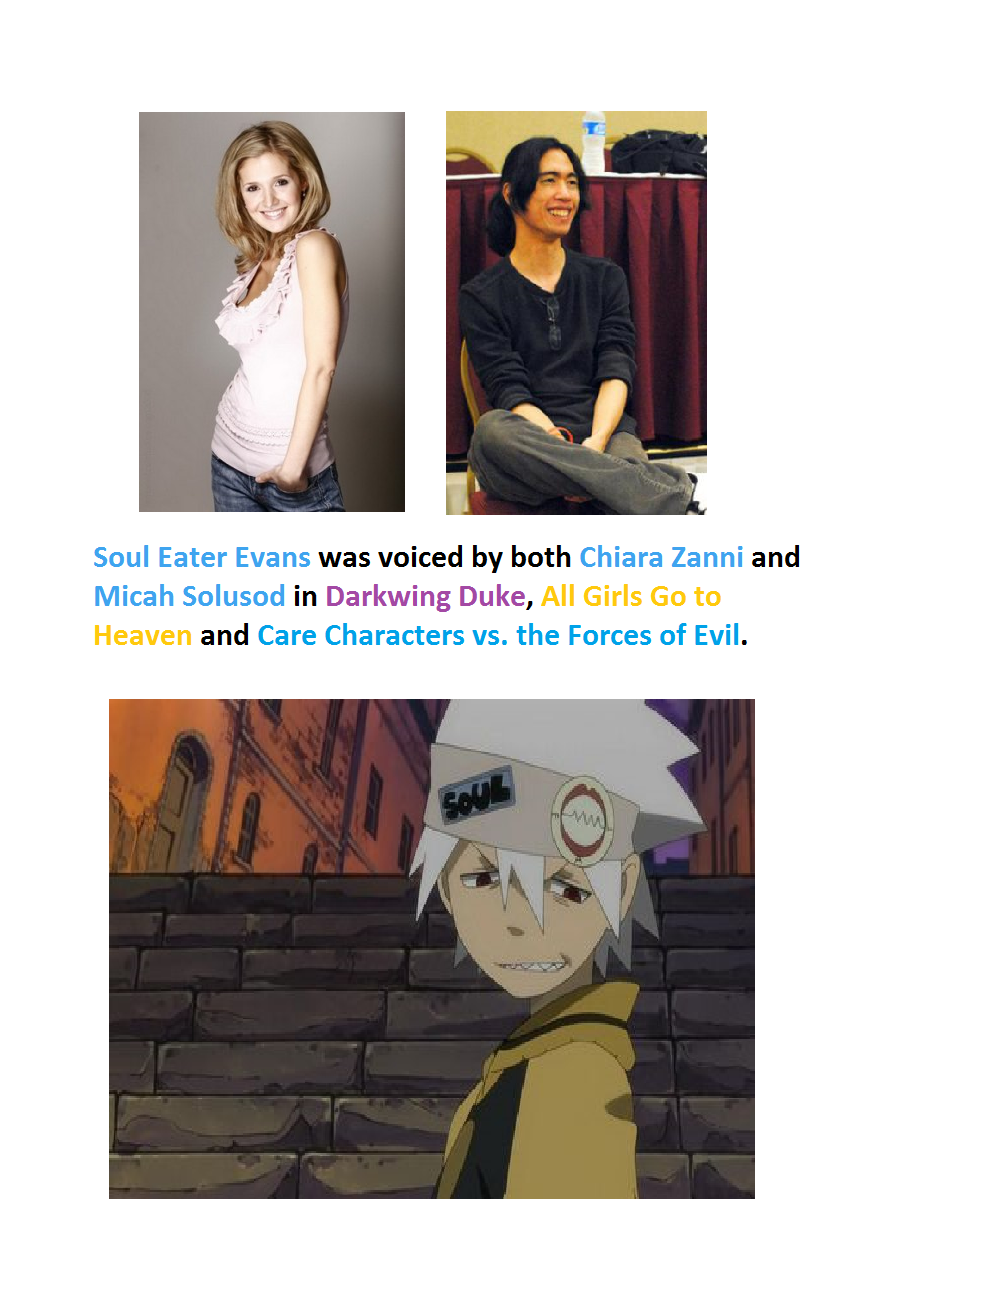 Soul Eater  Watch on Funimation